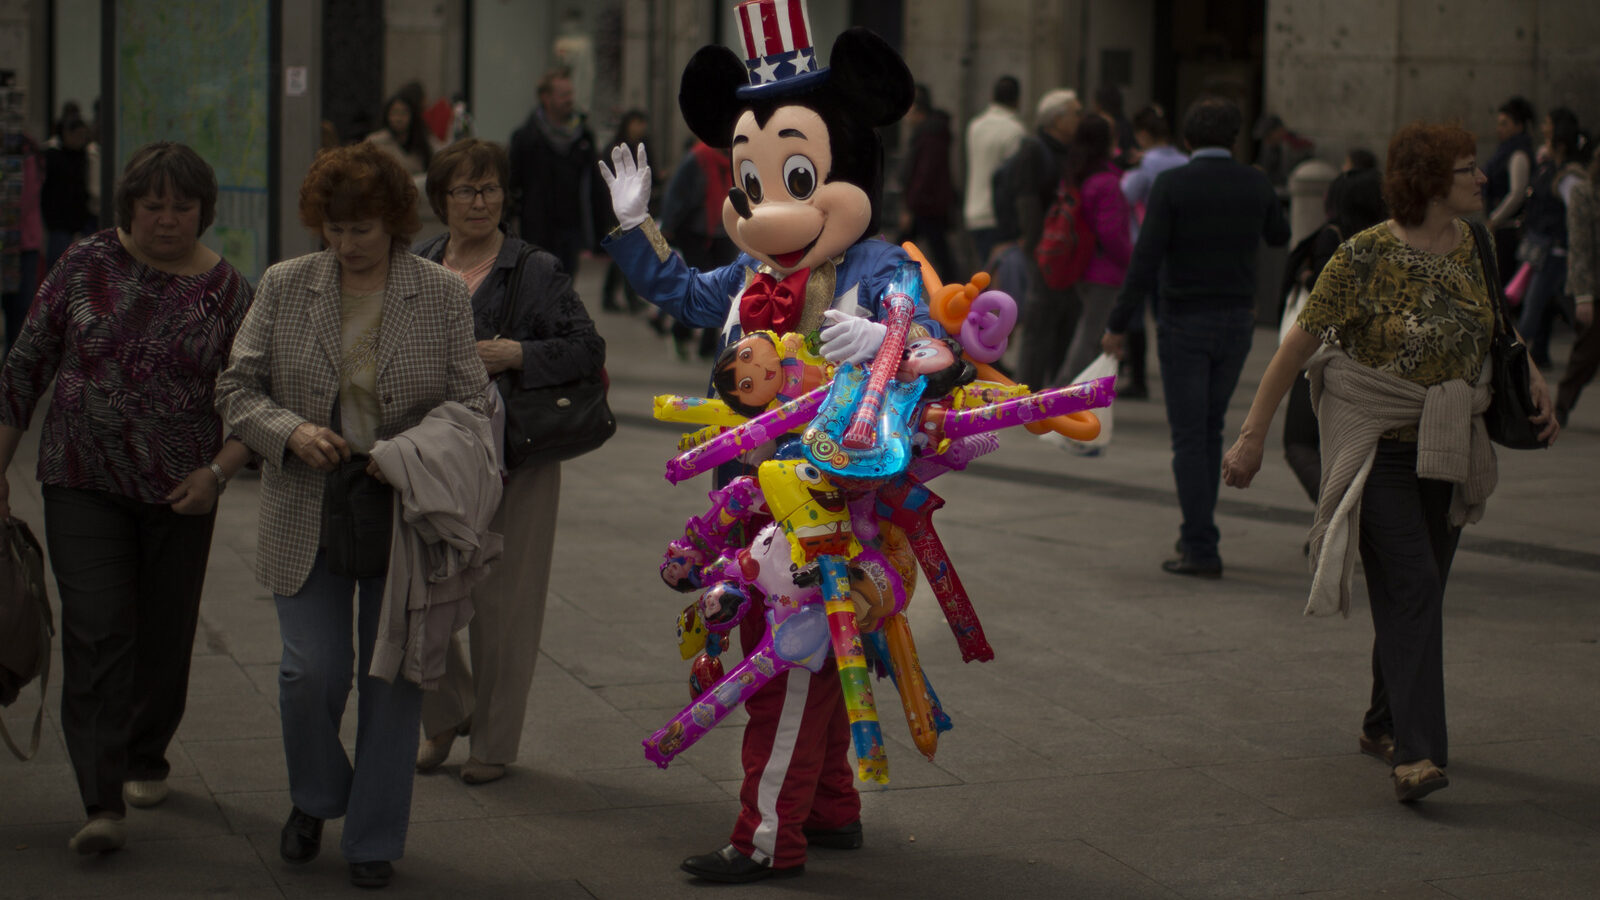 A man sells balloons wearing a Mickey Mouse costume with an US flag on his hat in a tourist area in Madrid, Spain. (AP/Andres Kudacki)